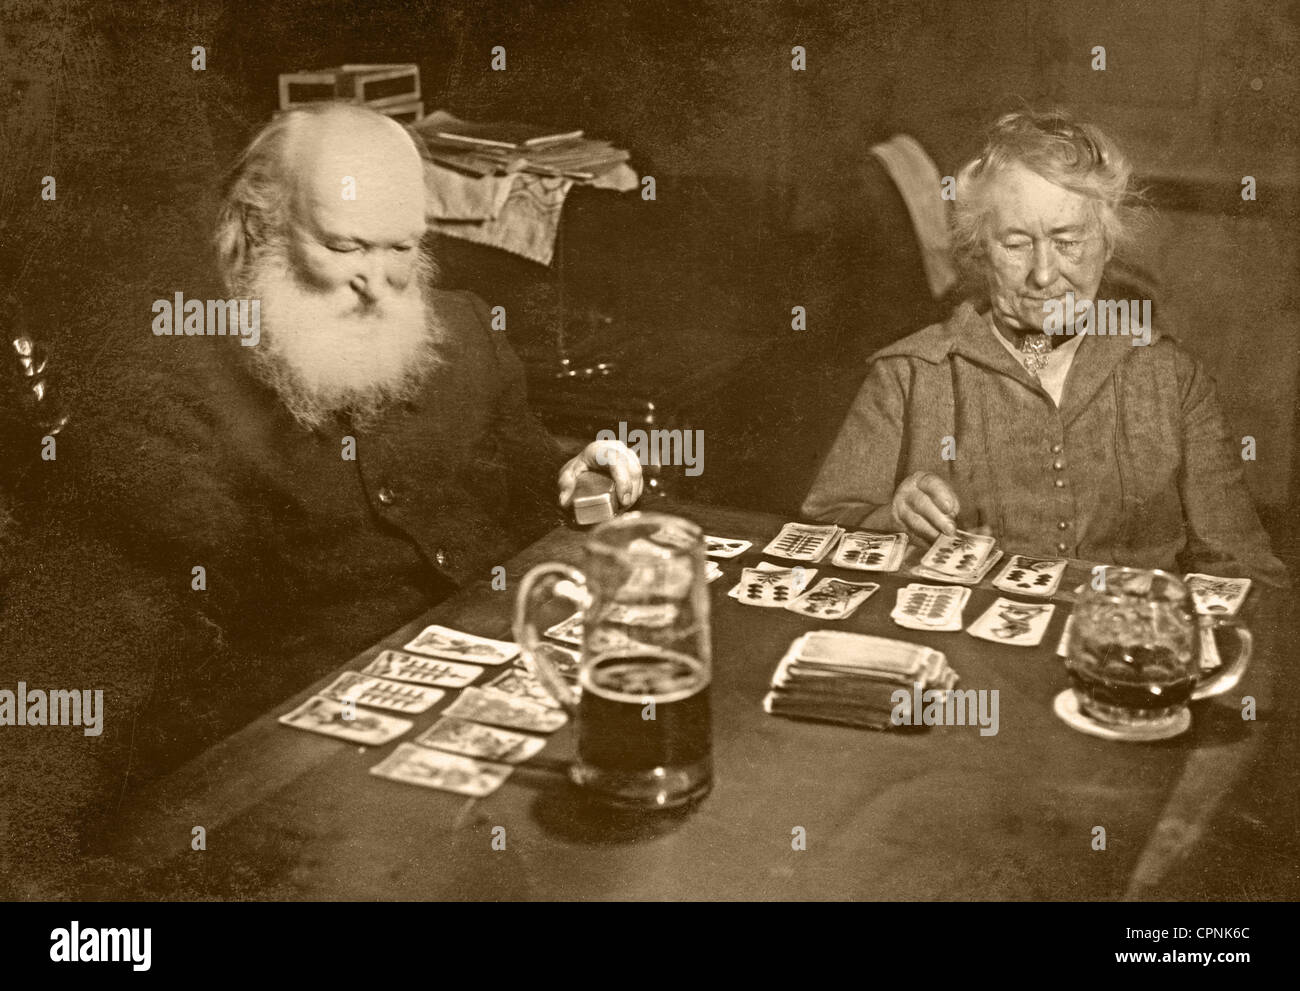 game, card game, married couple during cartomancy, Germany, circa 1924, Additional-Rights-Clearences-Not Available Stock Photo